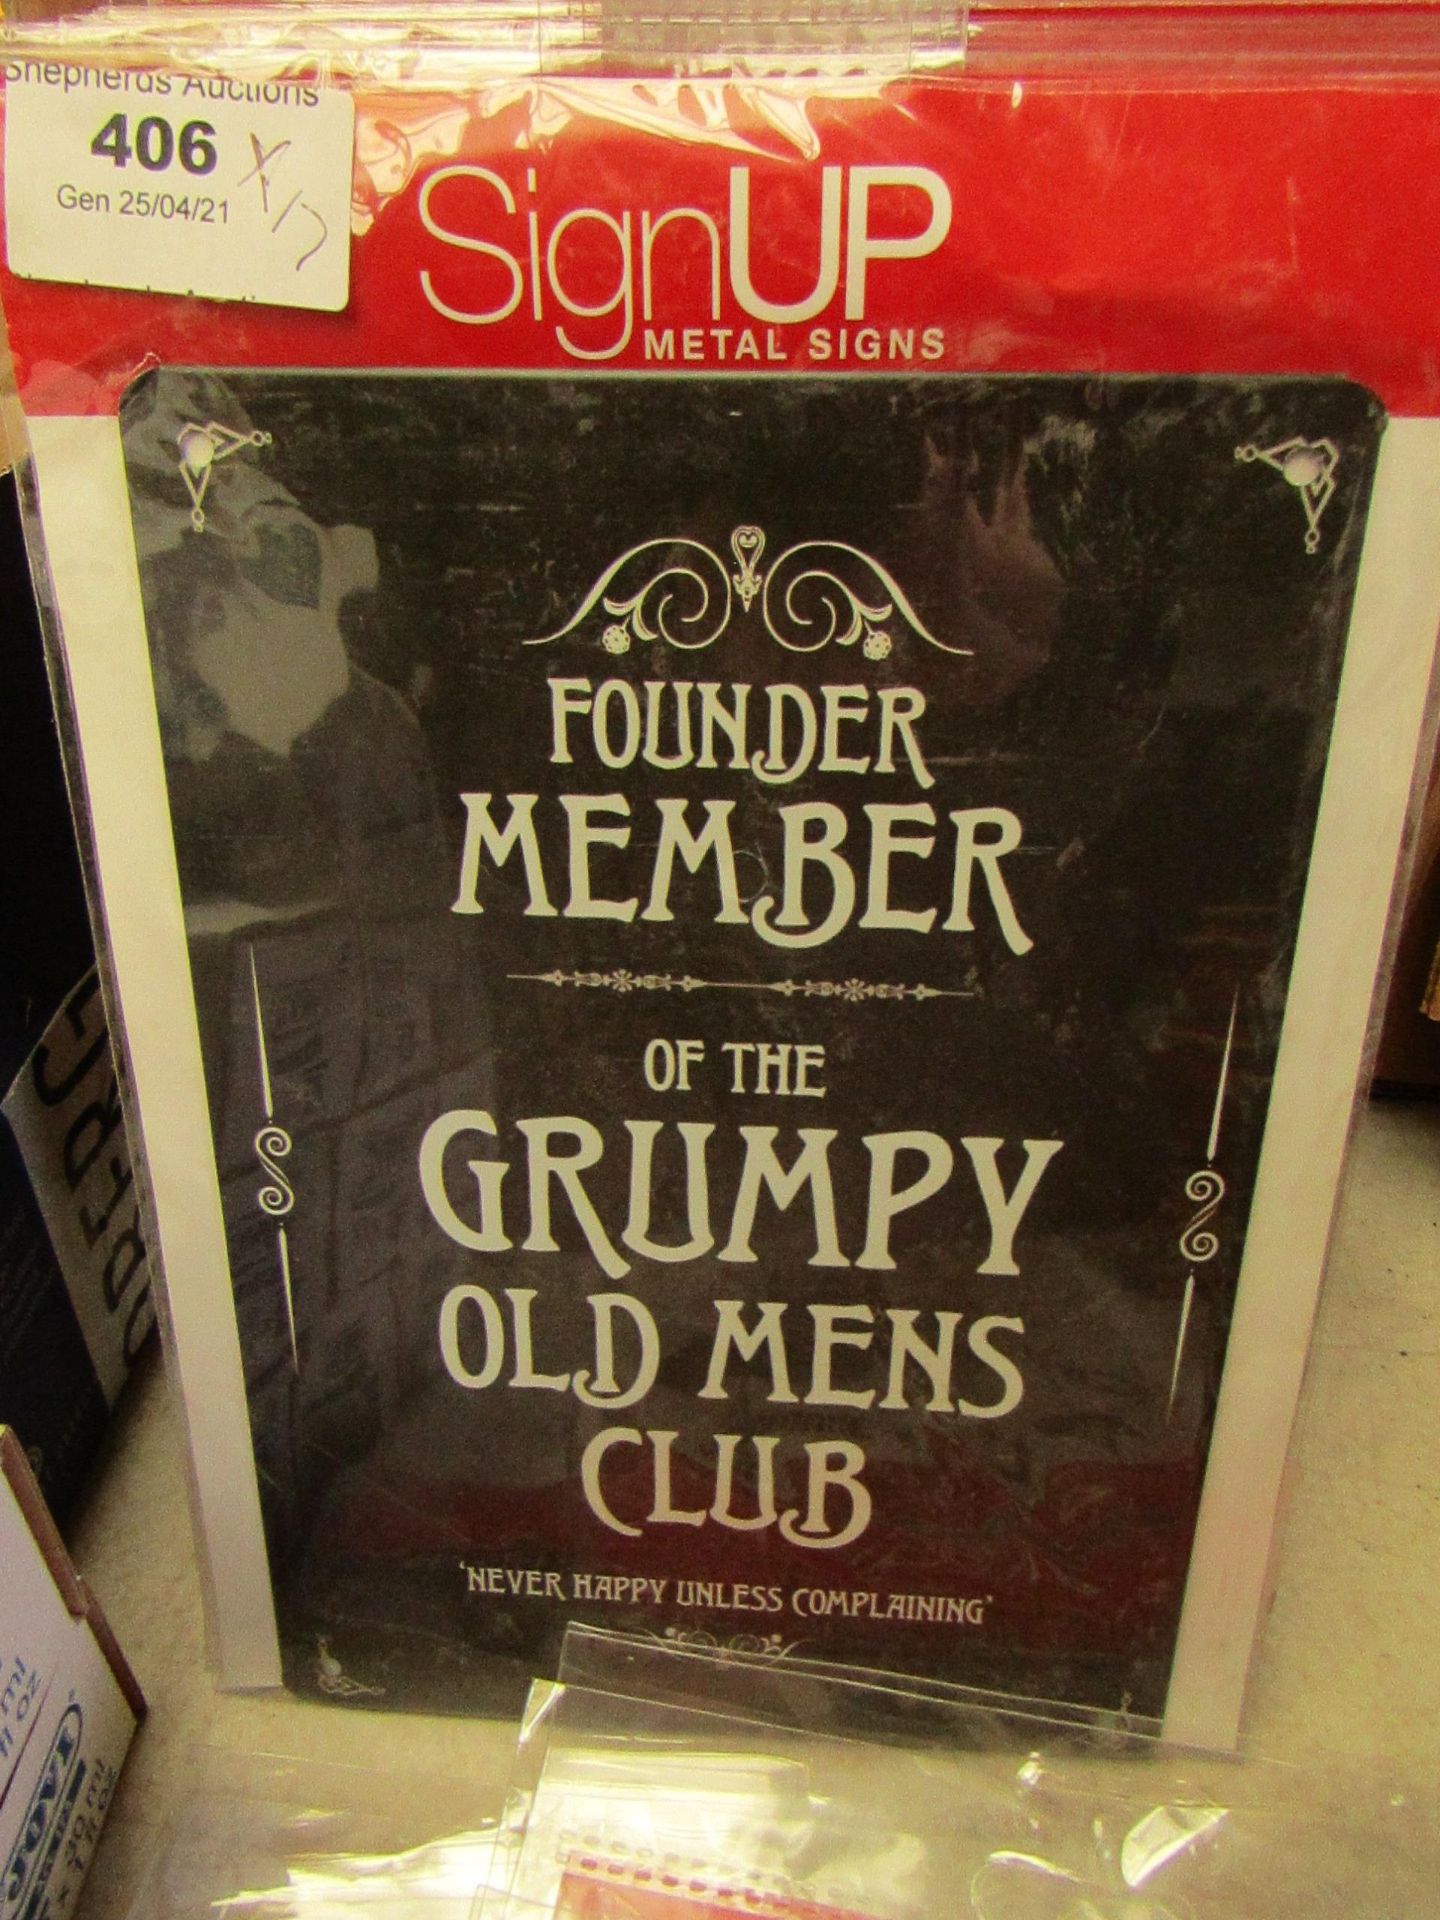 17x Novelty metal signs for the Foyunding member of the Grumpy old mens club